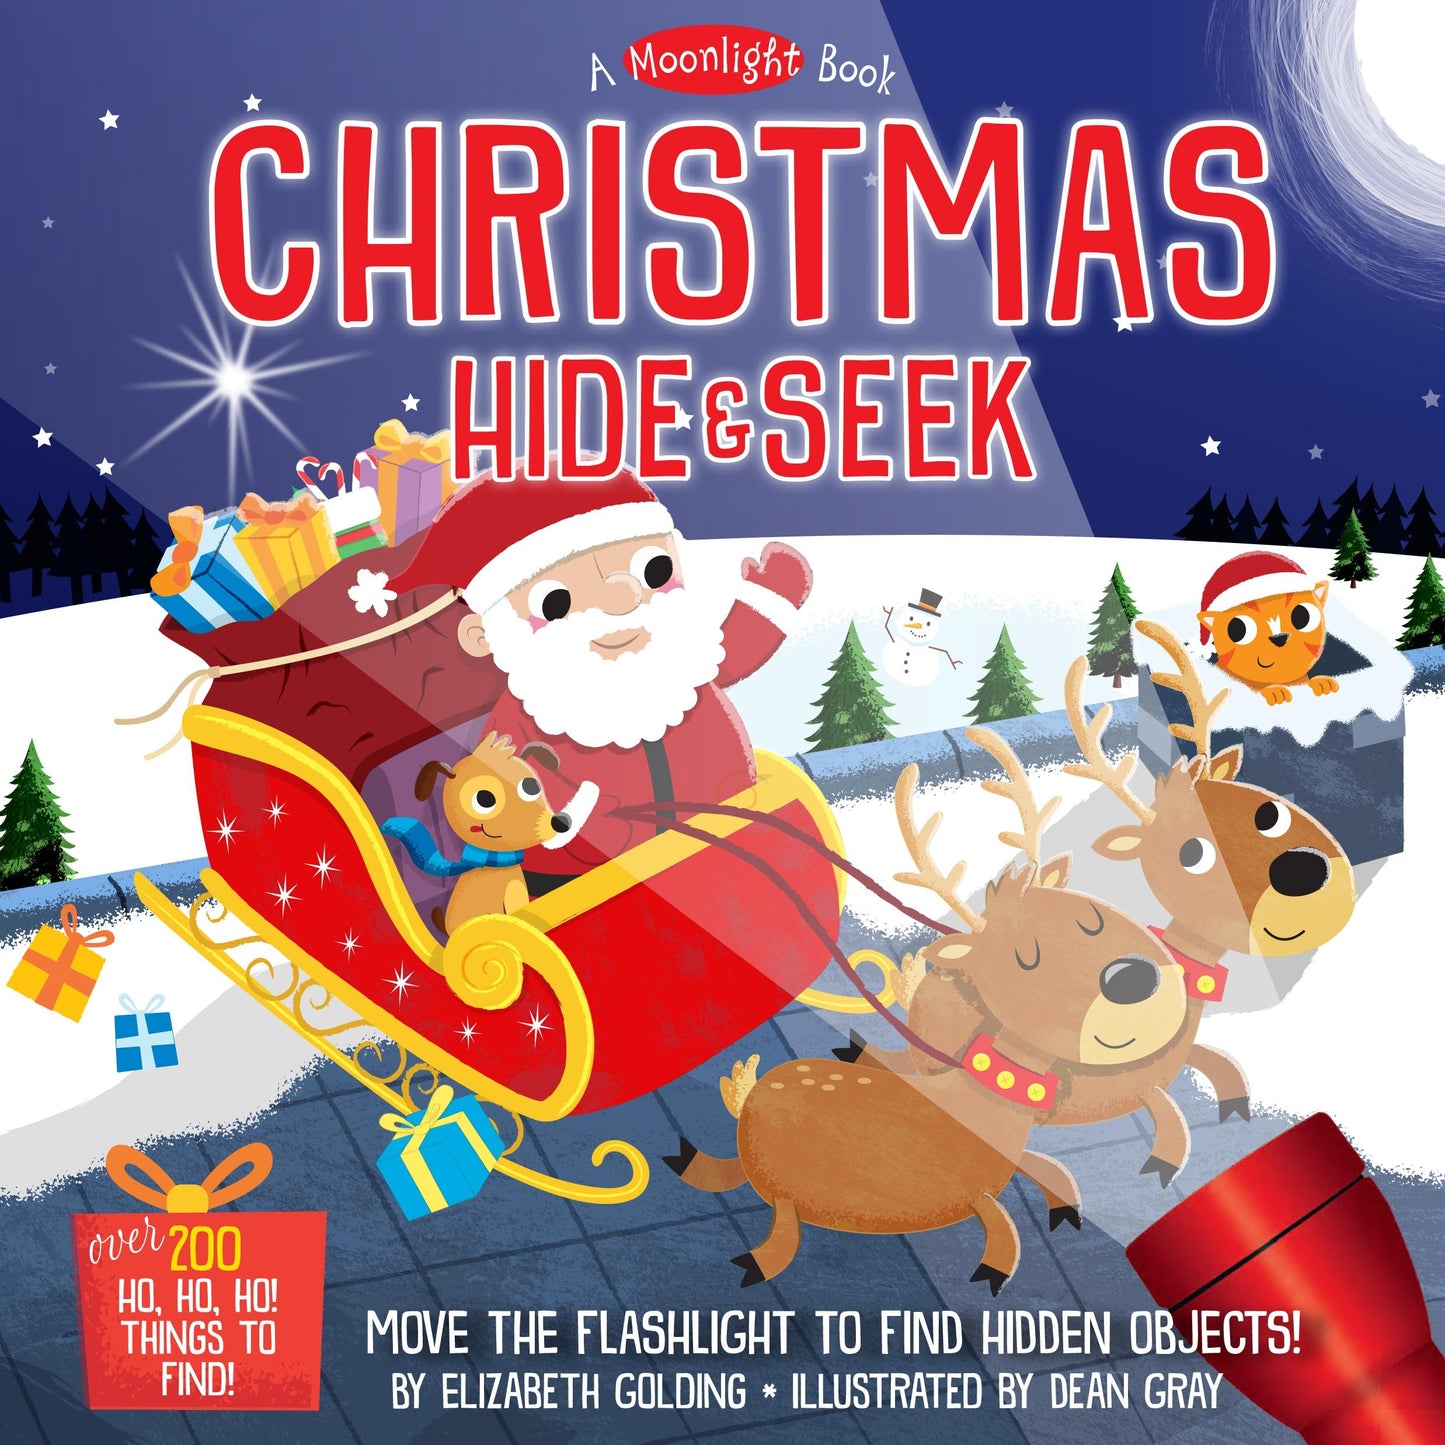 A Moonlight Book: Christmas Hide-and-Seek by Elizabeth Golding by Dean Gray